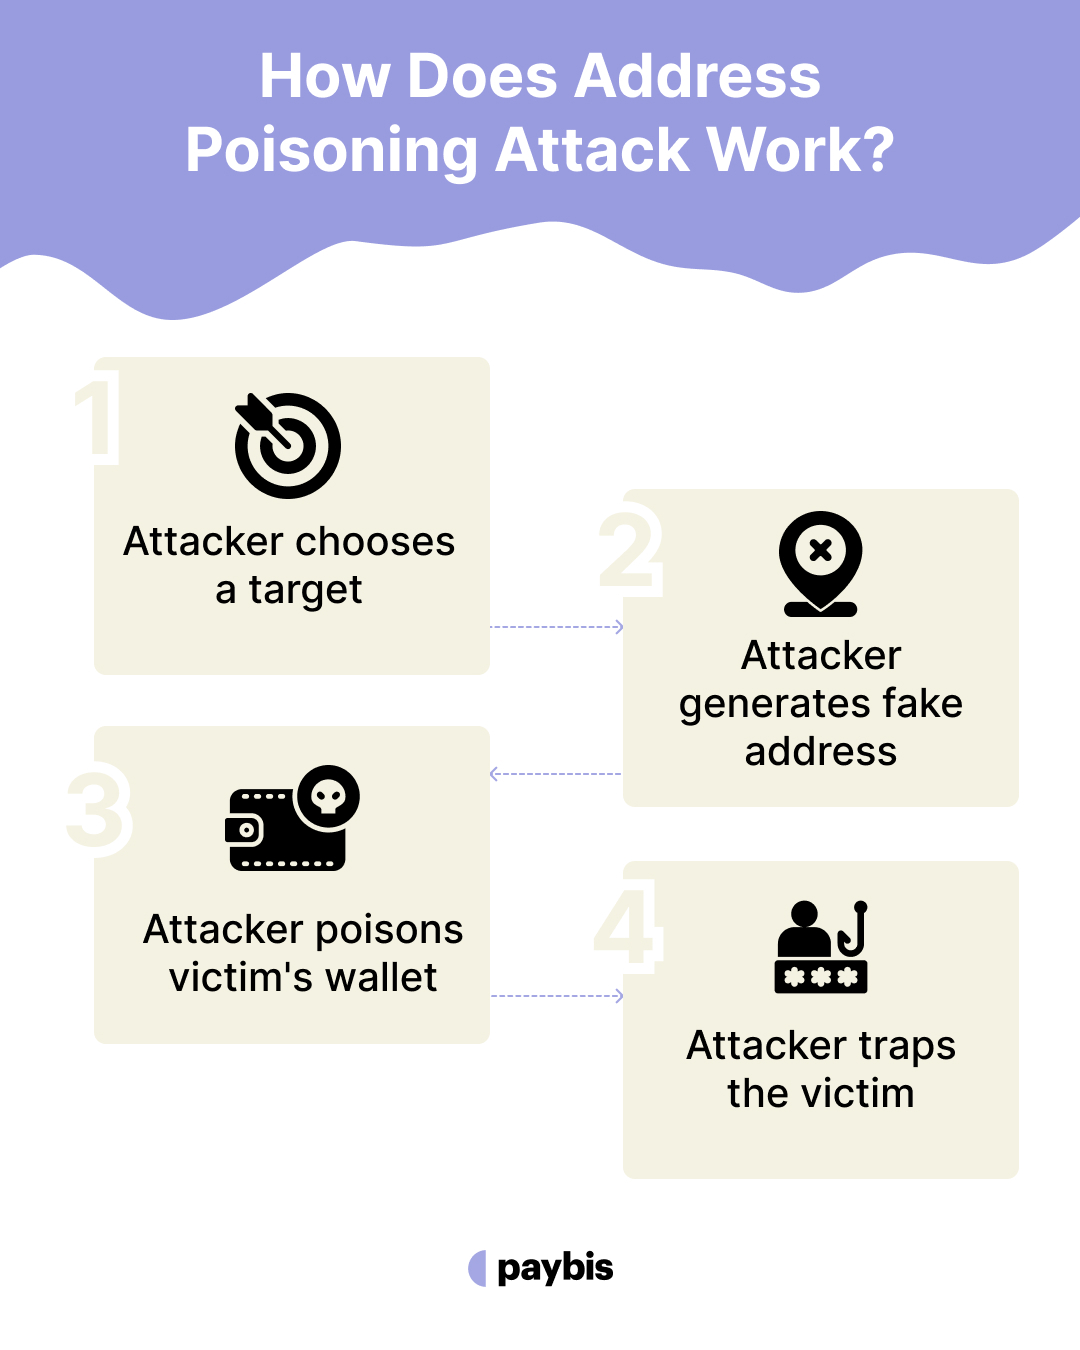 How Does Address Poisoning Attack Work